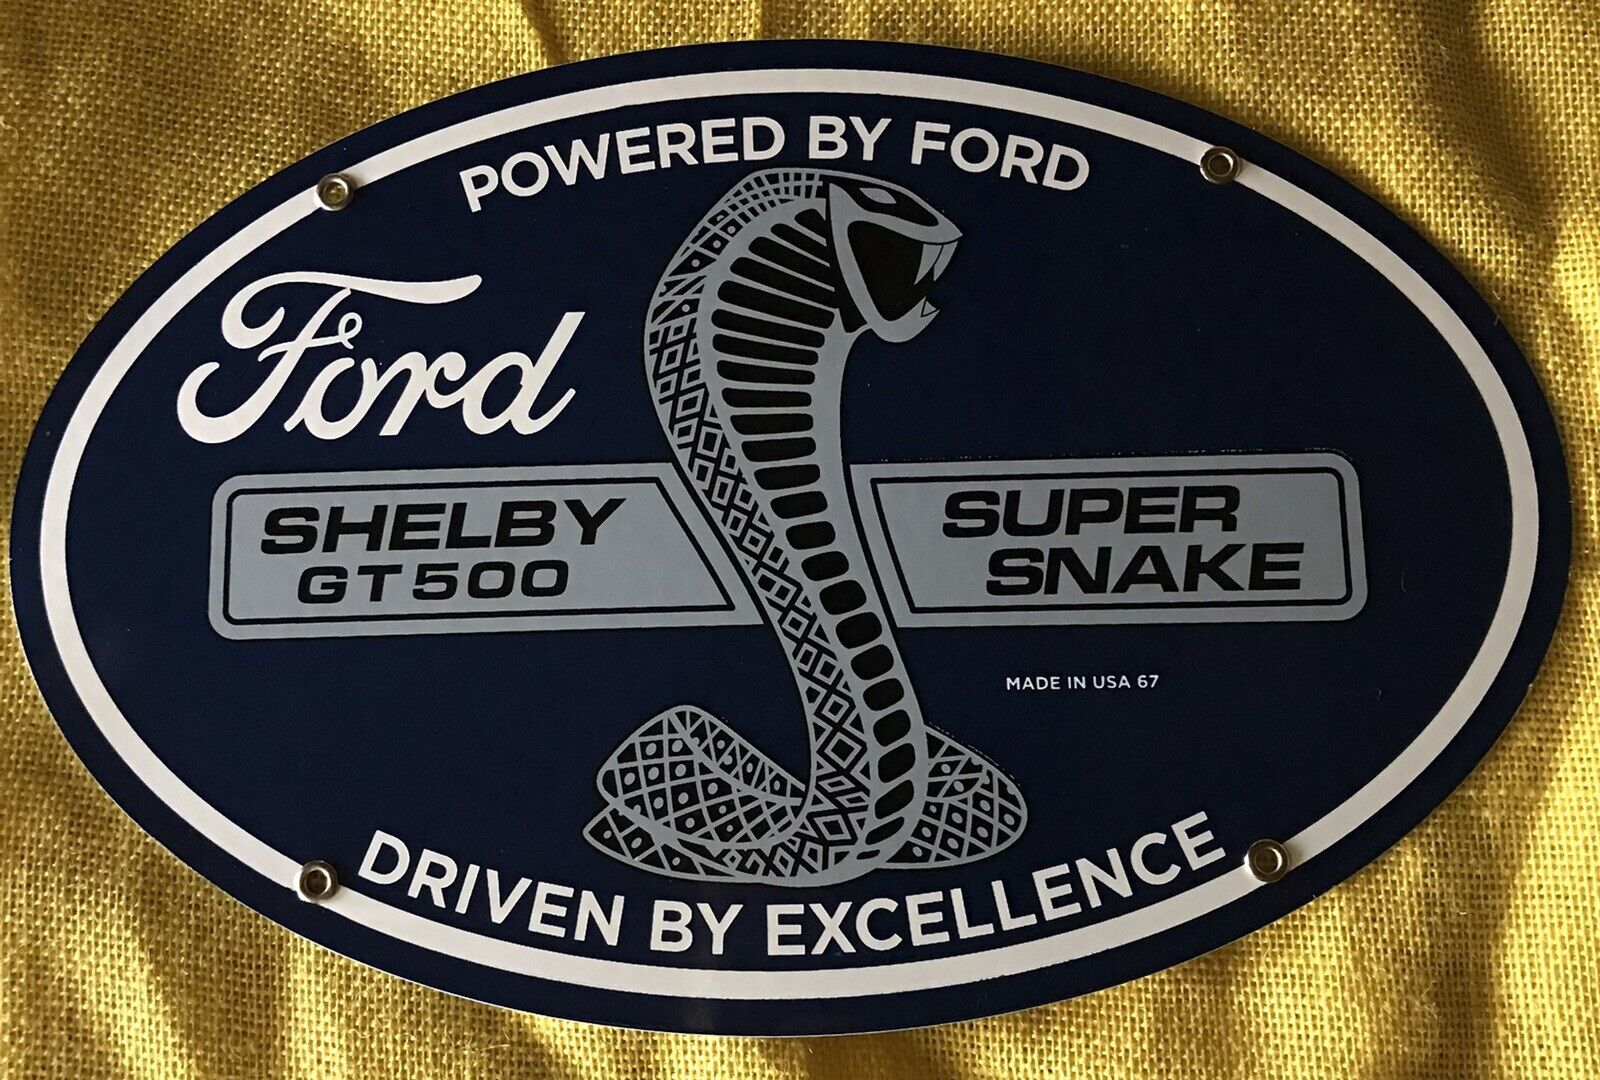 VINTAGE STYLE 1967 “FORD SHELBY” PORCELAIN SIGN 15”x91/2 INCHES “GT 500 “